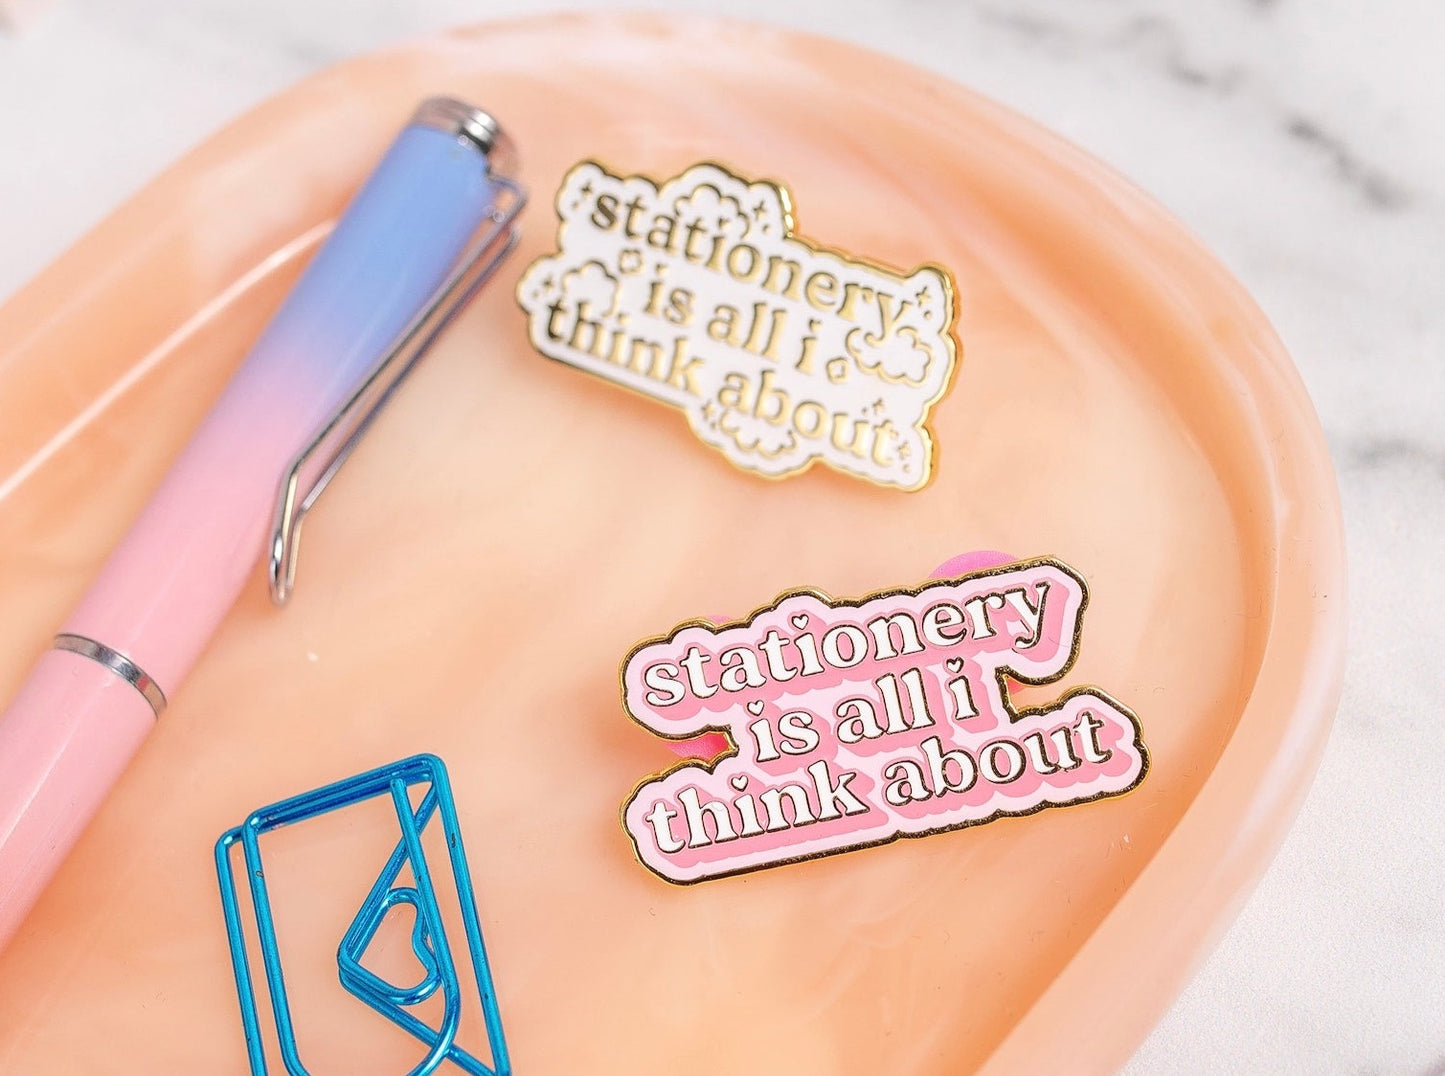 Stationery Is All I Think About Hard Enamel Pin